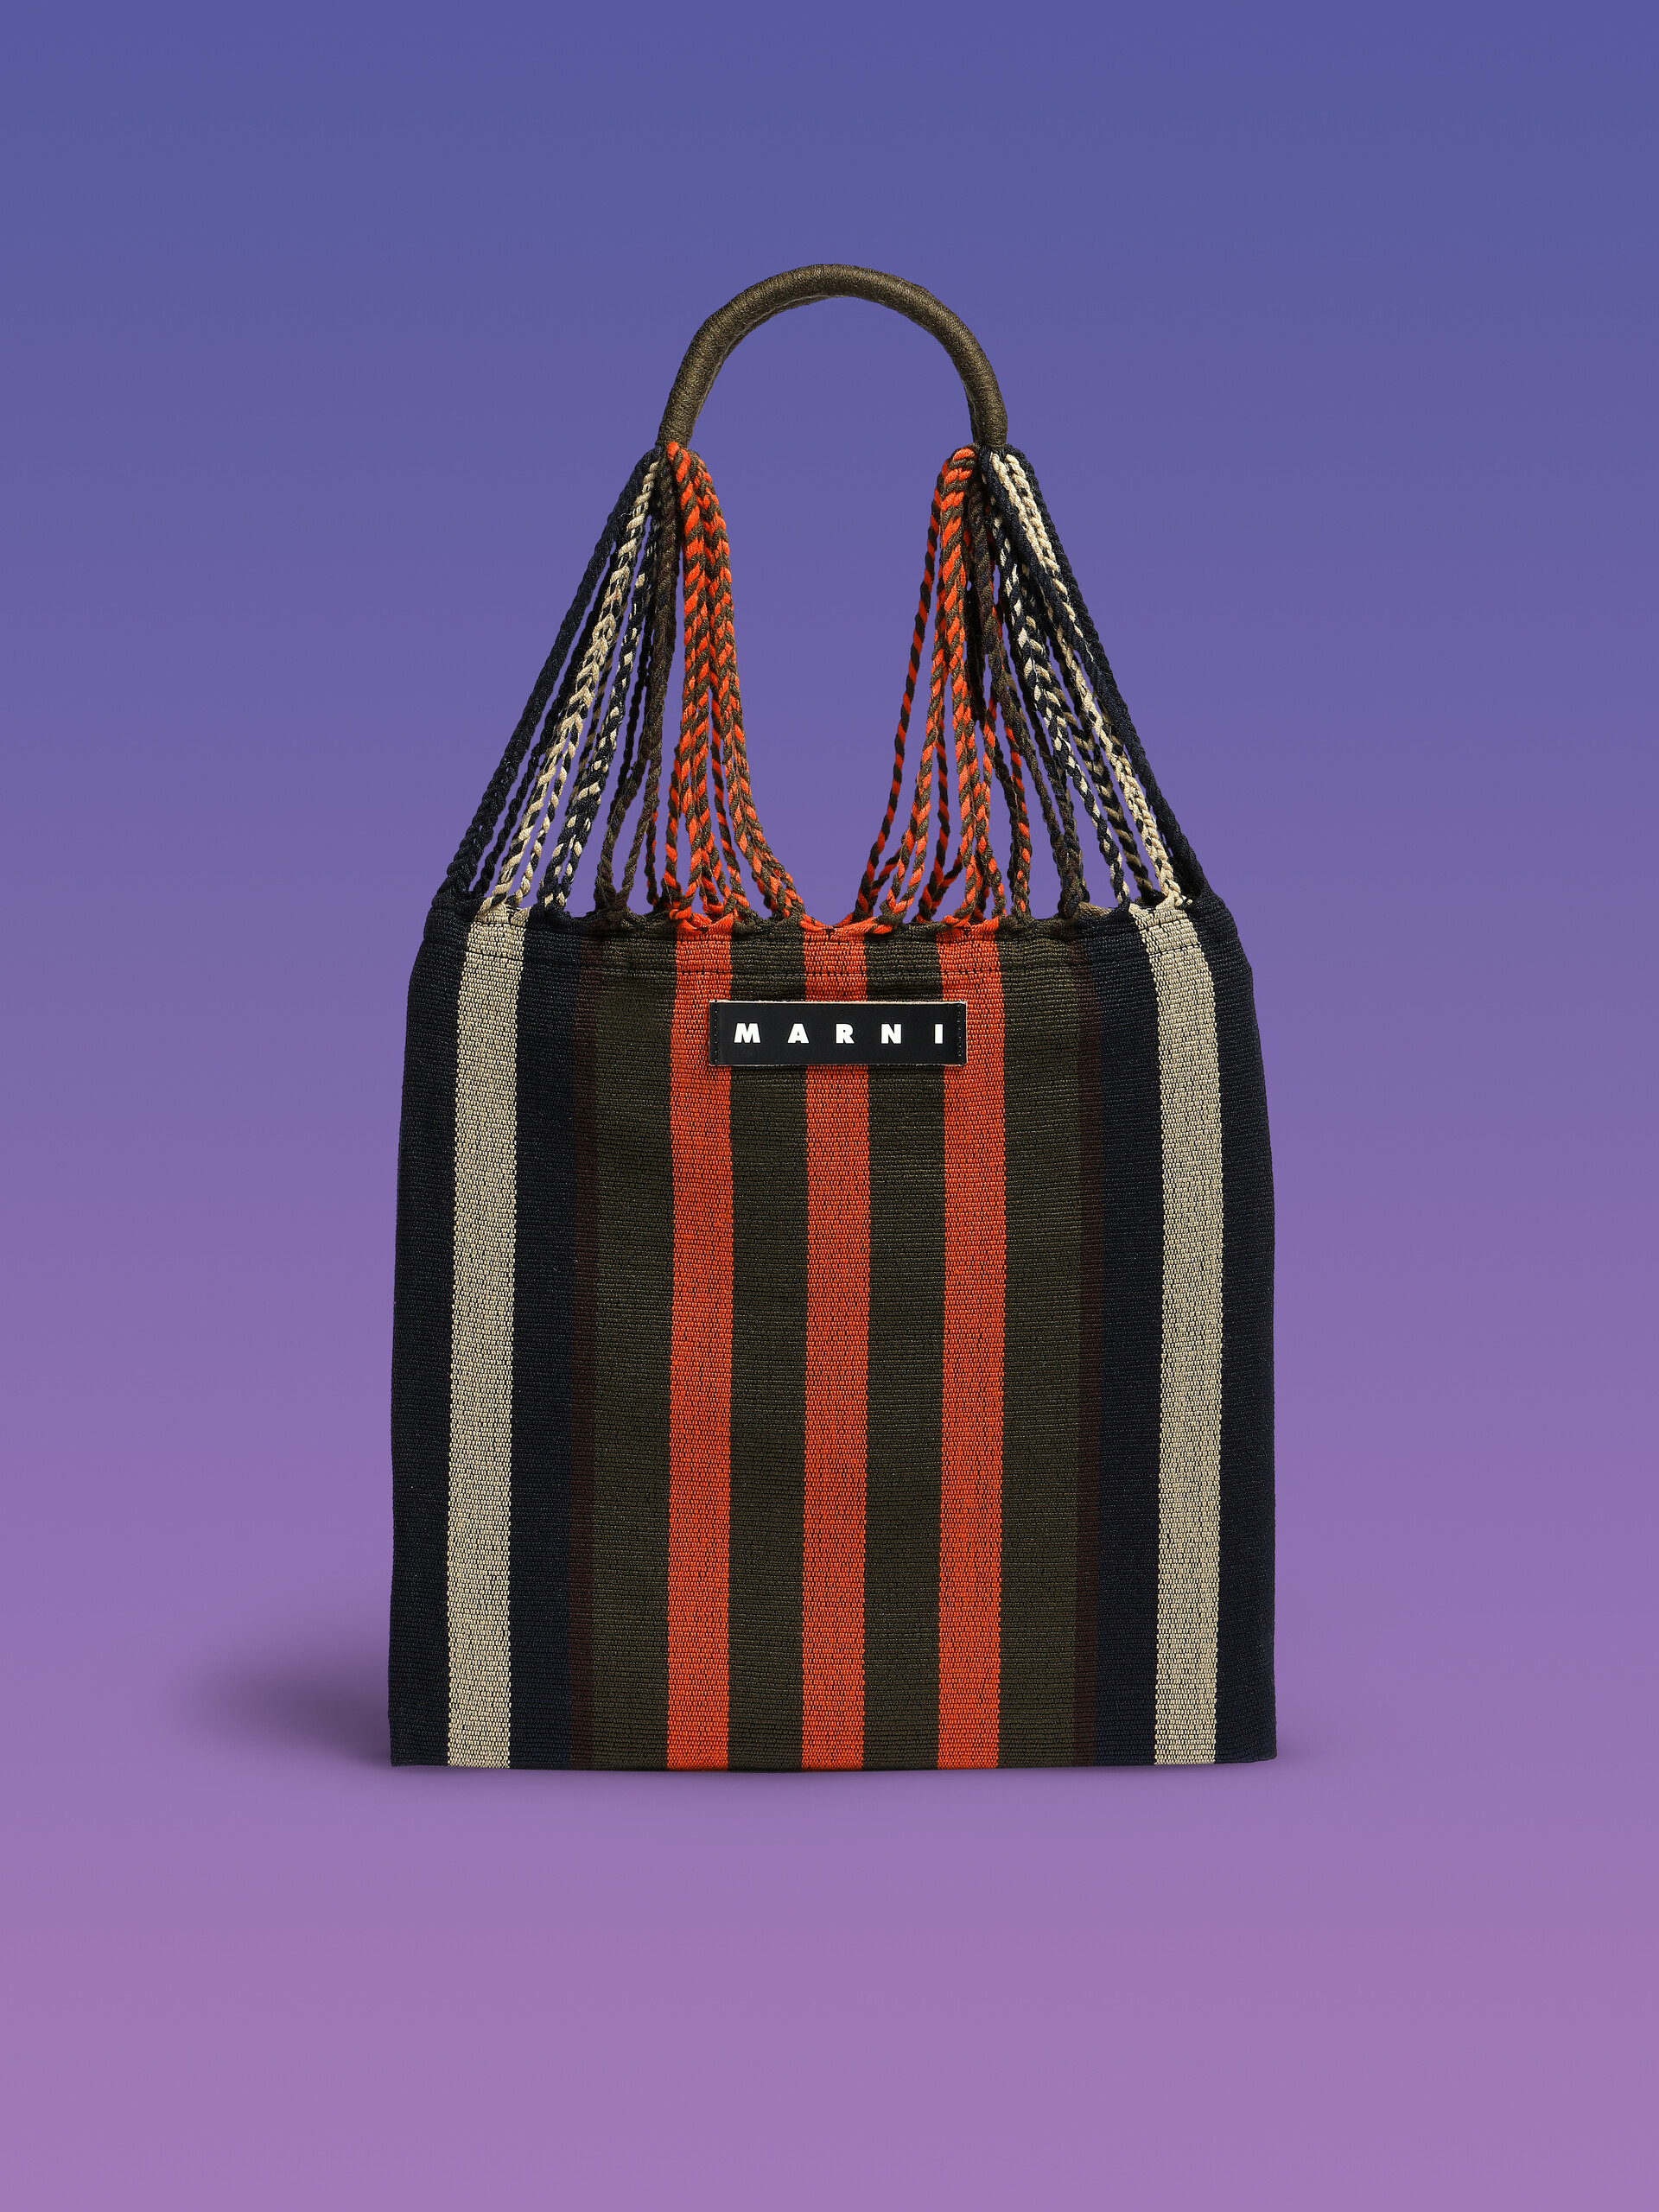 MARNI MARKET shopping bag in polyester with hammock-like handle grey turquoise and red - Bags - Image 1